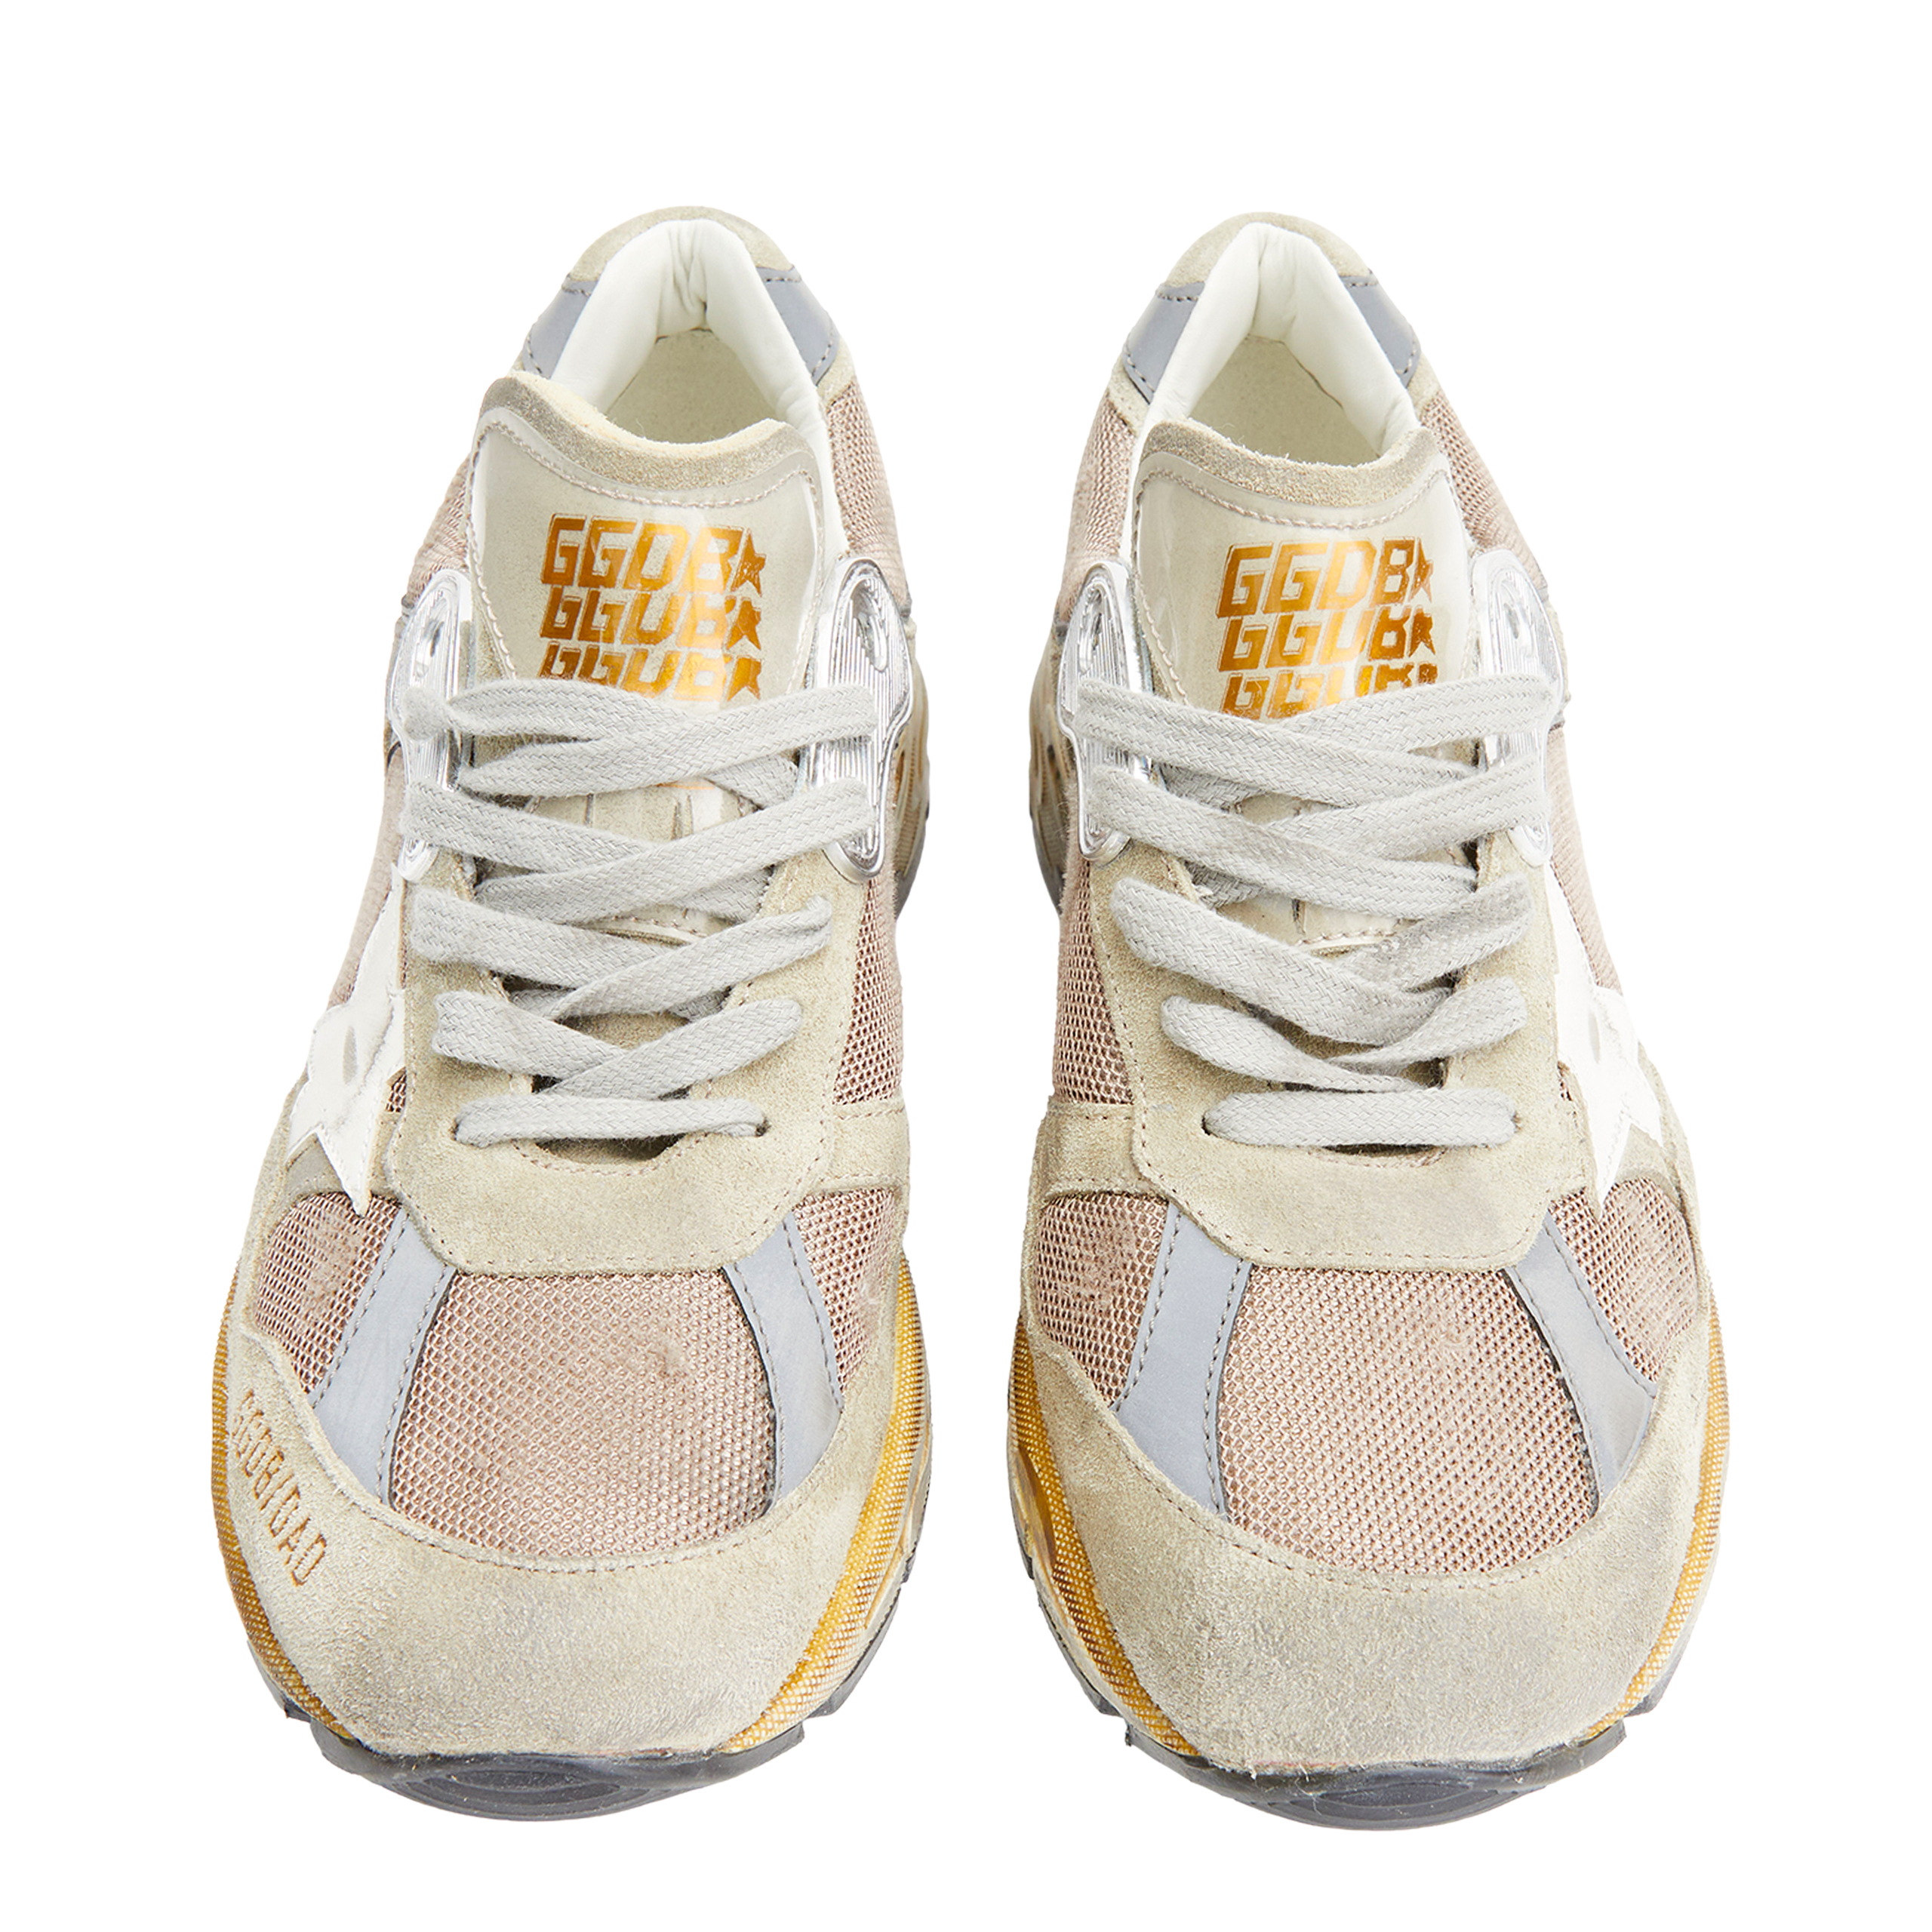 None Golden Goose Deluxe Brand GMF00199/F003271/81751, размер 40;41;42;43;44;45;46 GMF00199/F003271/81751 - фото 1